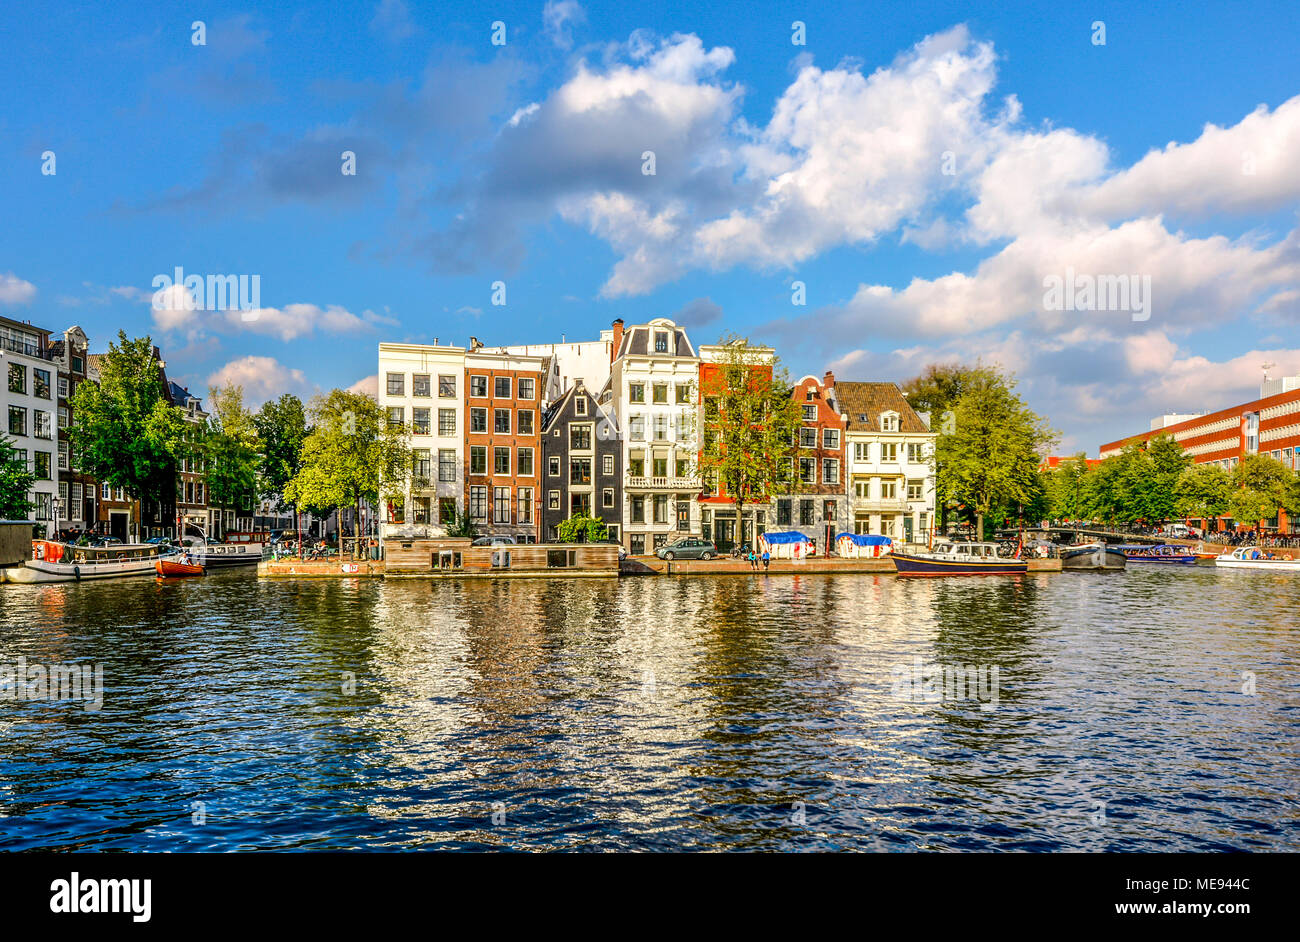 A row of canal homes stacked together tightly on a canal in the museum district of Amsterdam, The Netherlands Stock Photo